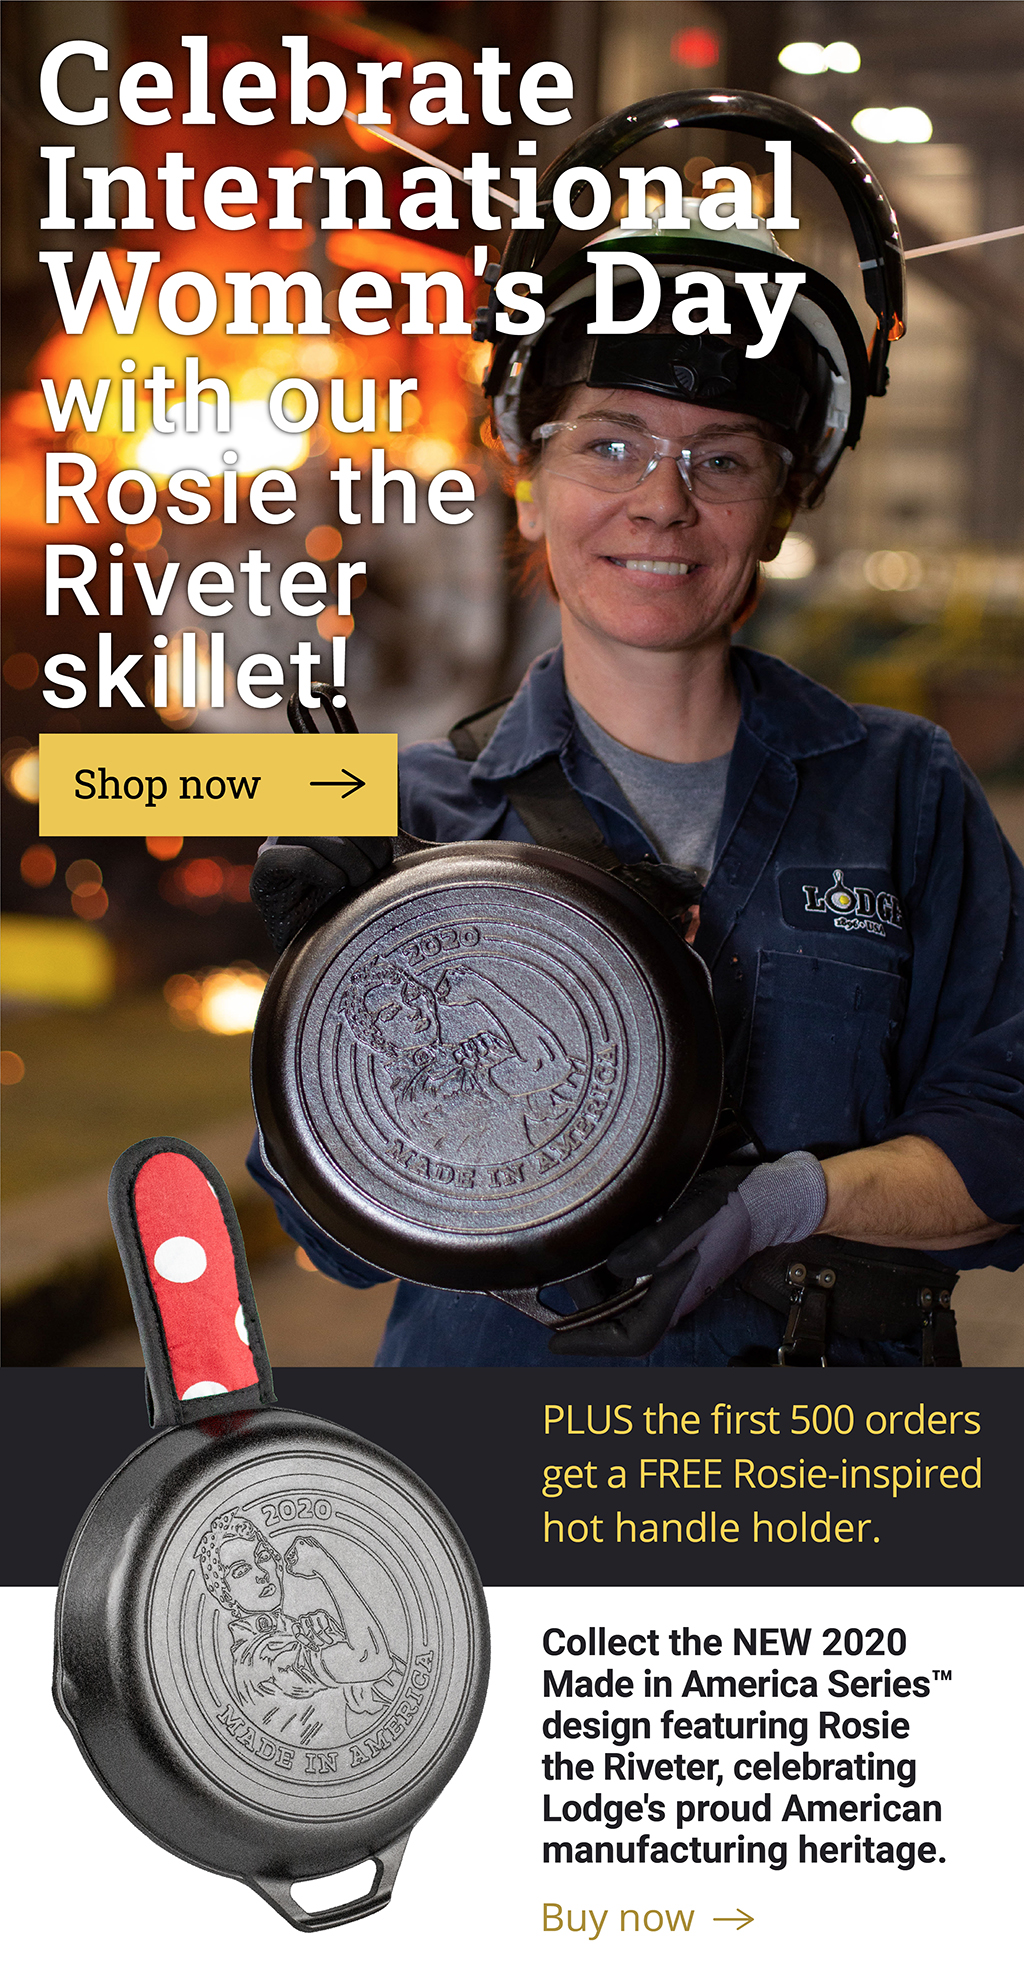 Celebrate International Women''s Day with our Rosie the Riveter skillet! [Shop now ?] PLUS the first 500 orders get a FREE Rosie-inspired hot handle holder.  Collect the NEW 2020 Made in America SeriesT design featuring Rosie the Riveter, celebrating Lodge''s proud American manufacturing heritage.  [Buy now ?]